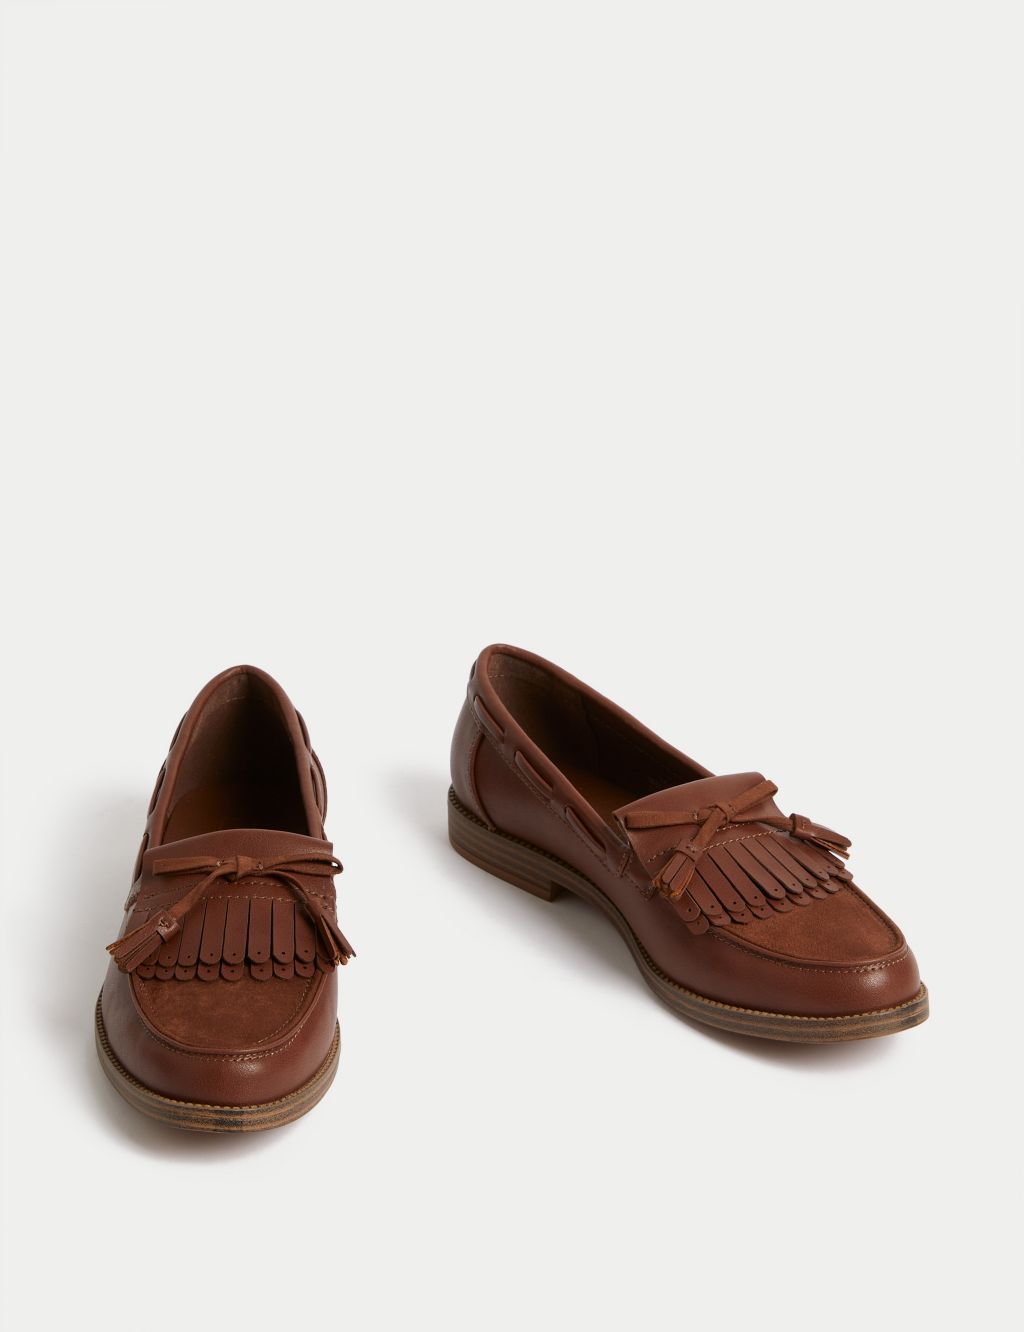 Patent Tassel Bow Loafers image 1